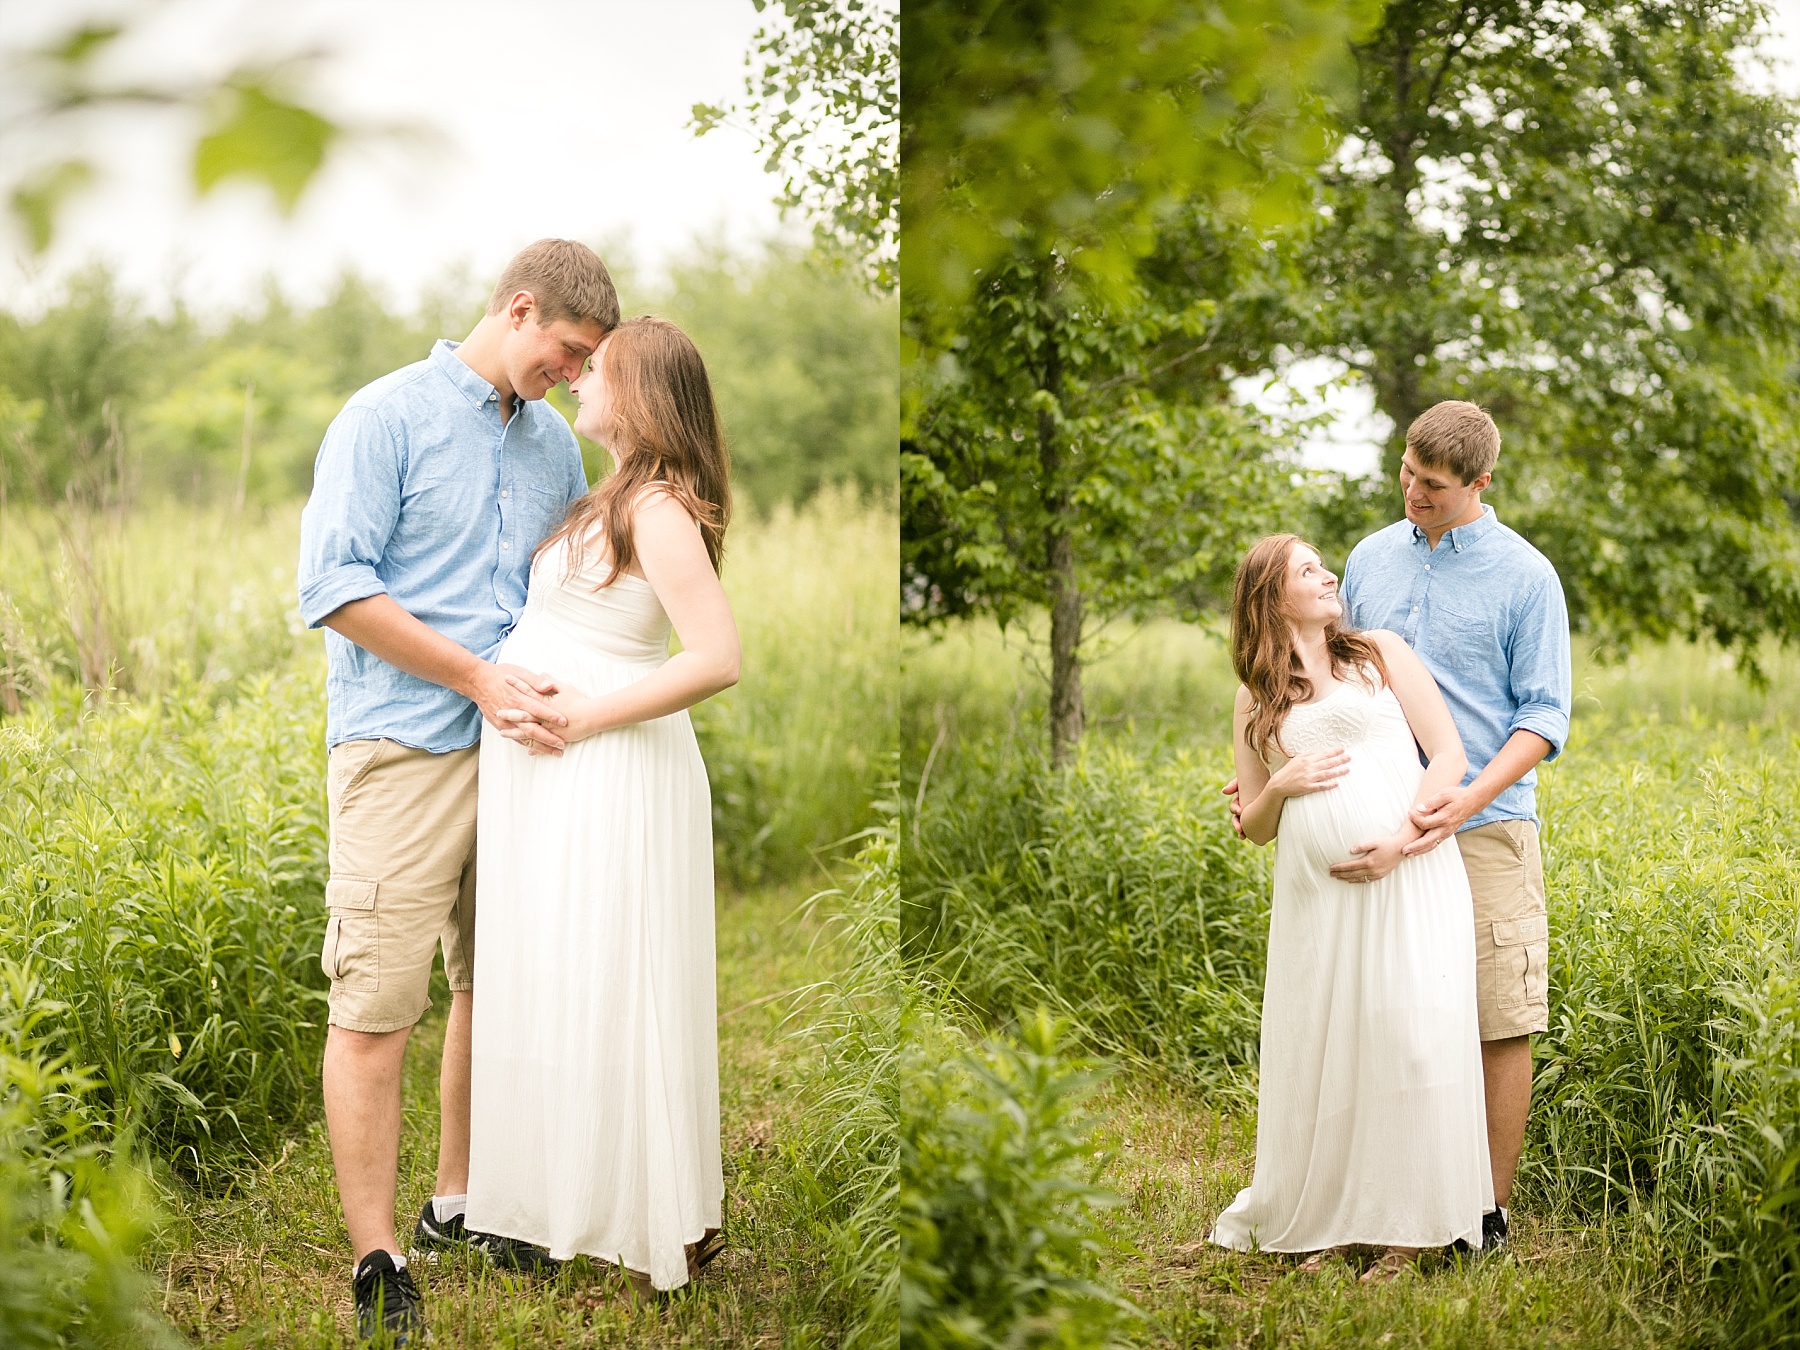 They walked through fields of daisies as the rain started to softly fall for this Wisconsin maternity session.